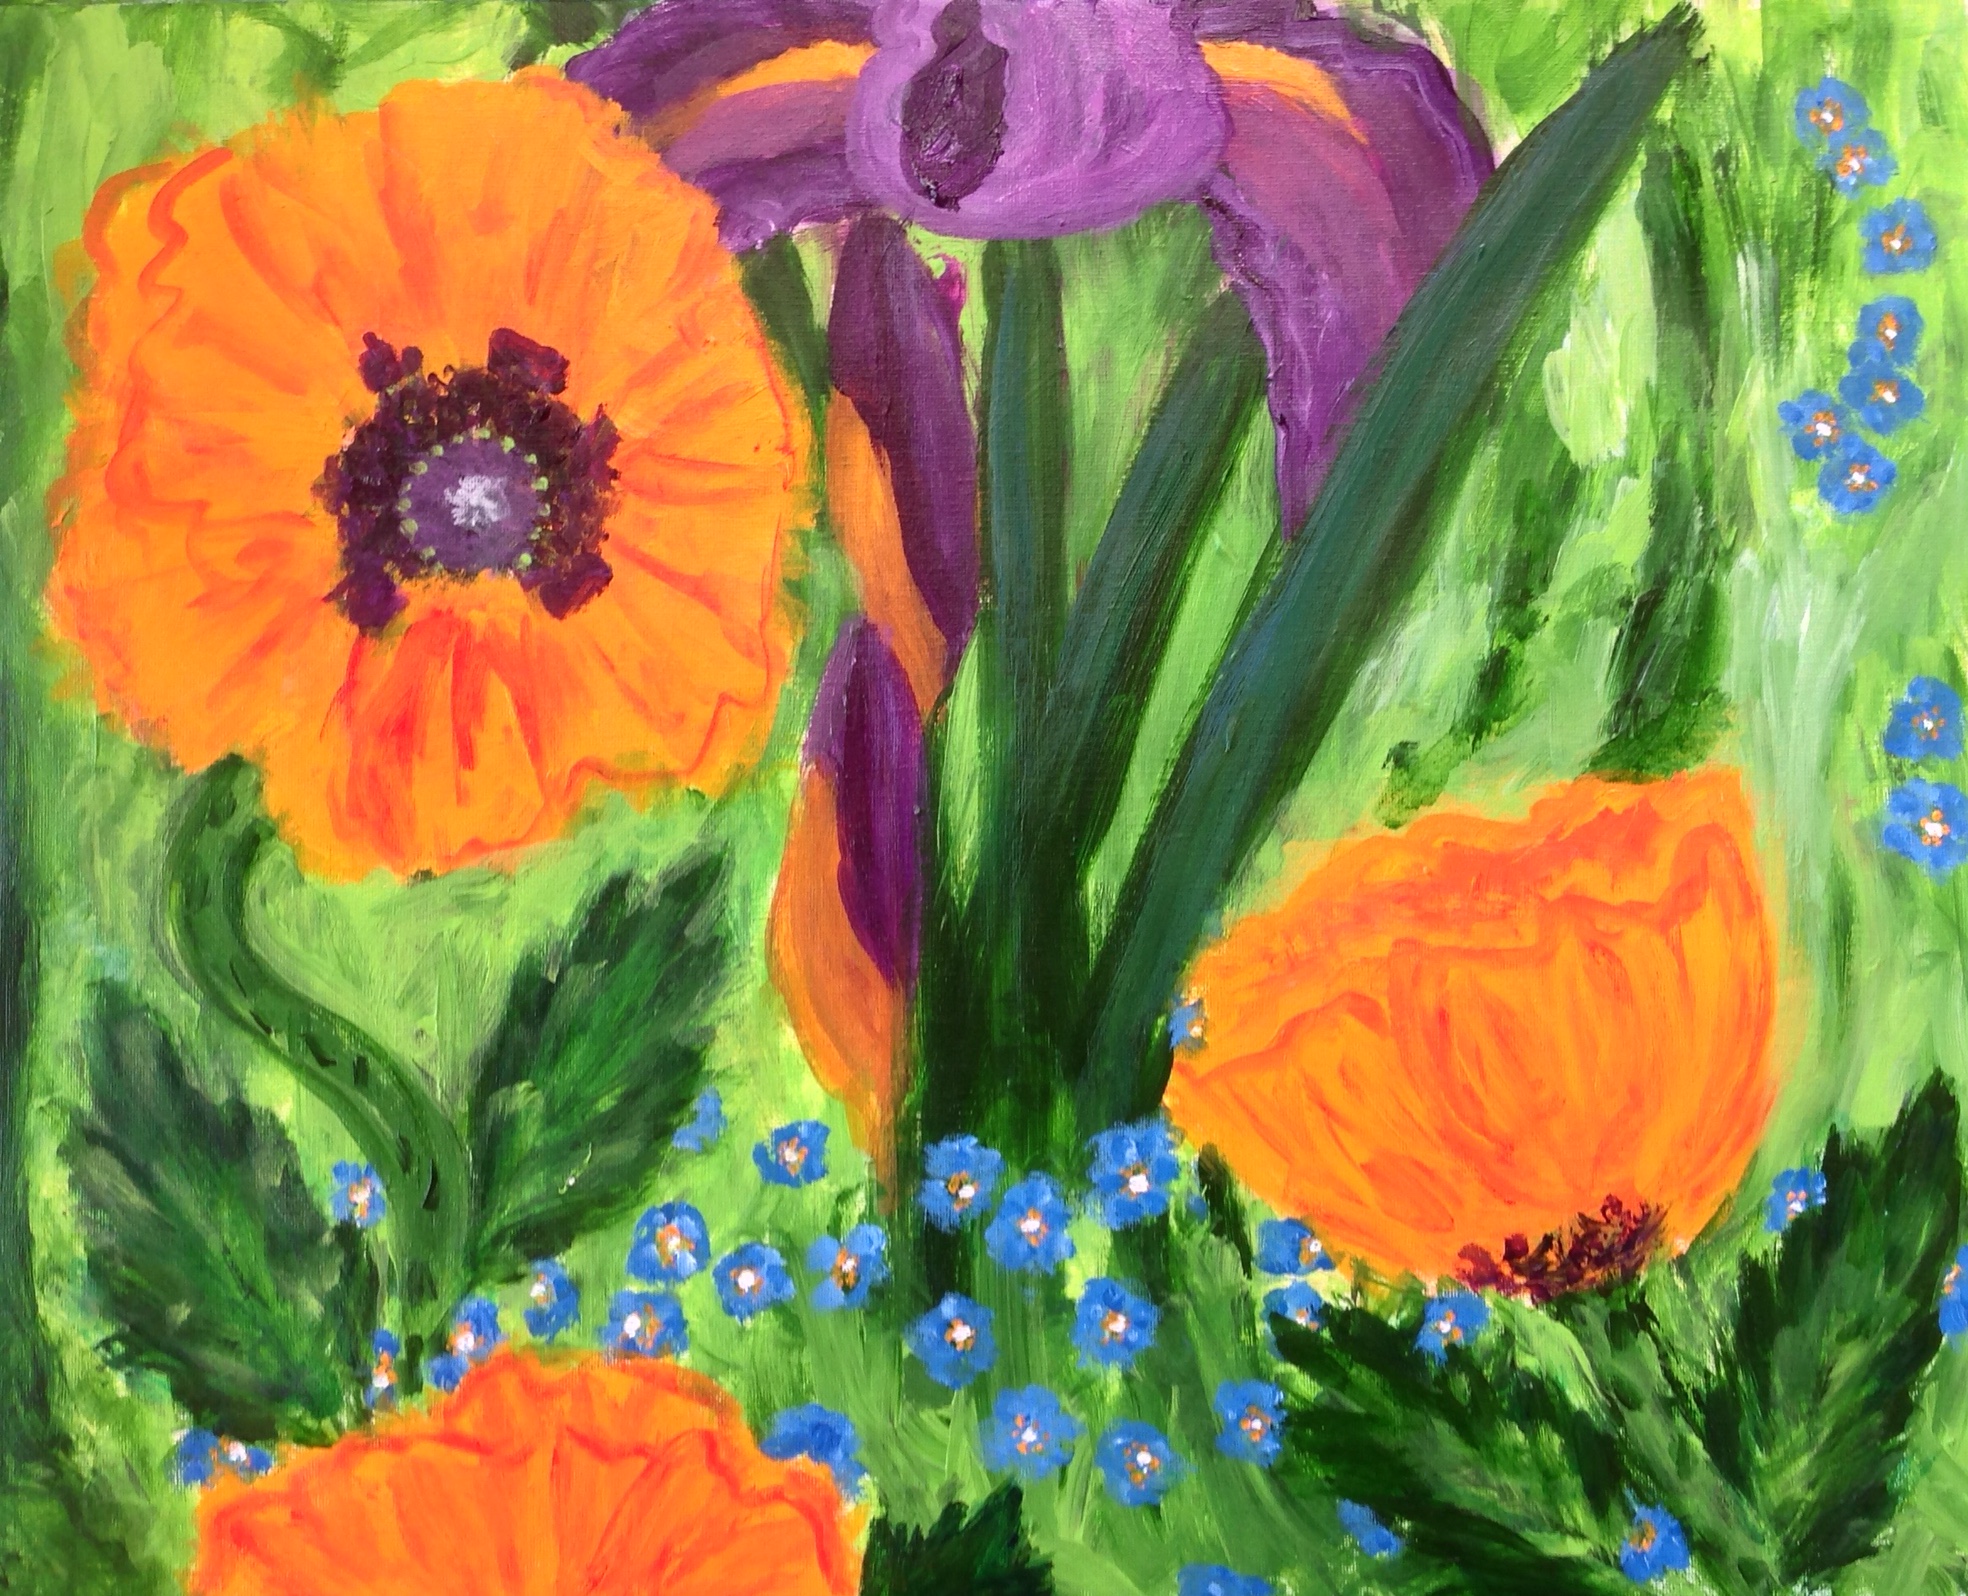 “Spring blooms” 20” x 16” acrylic on canvas